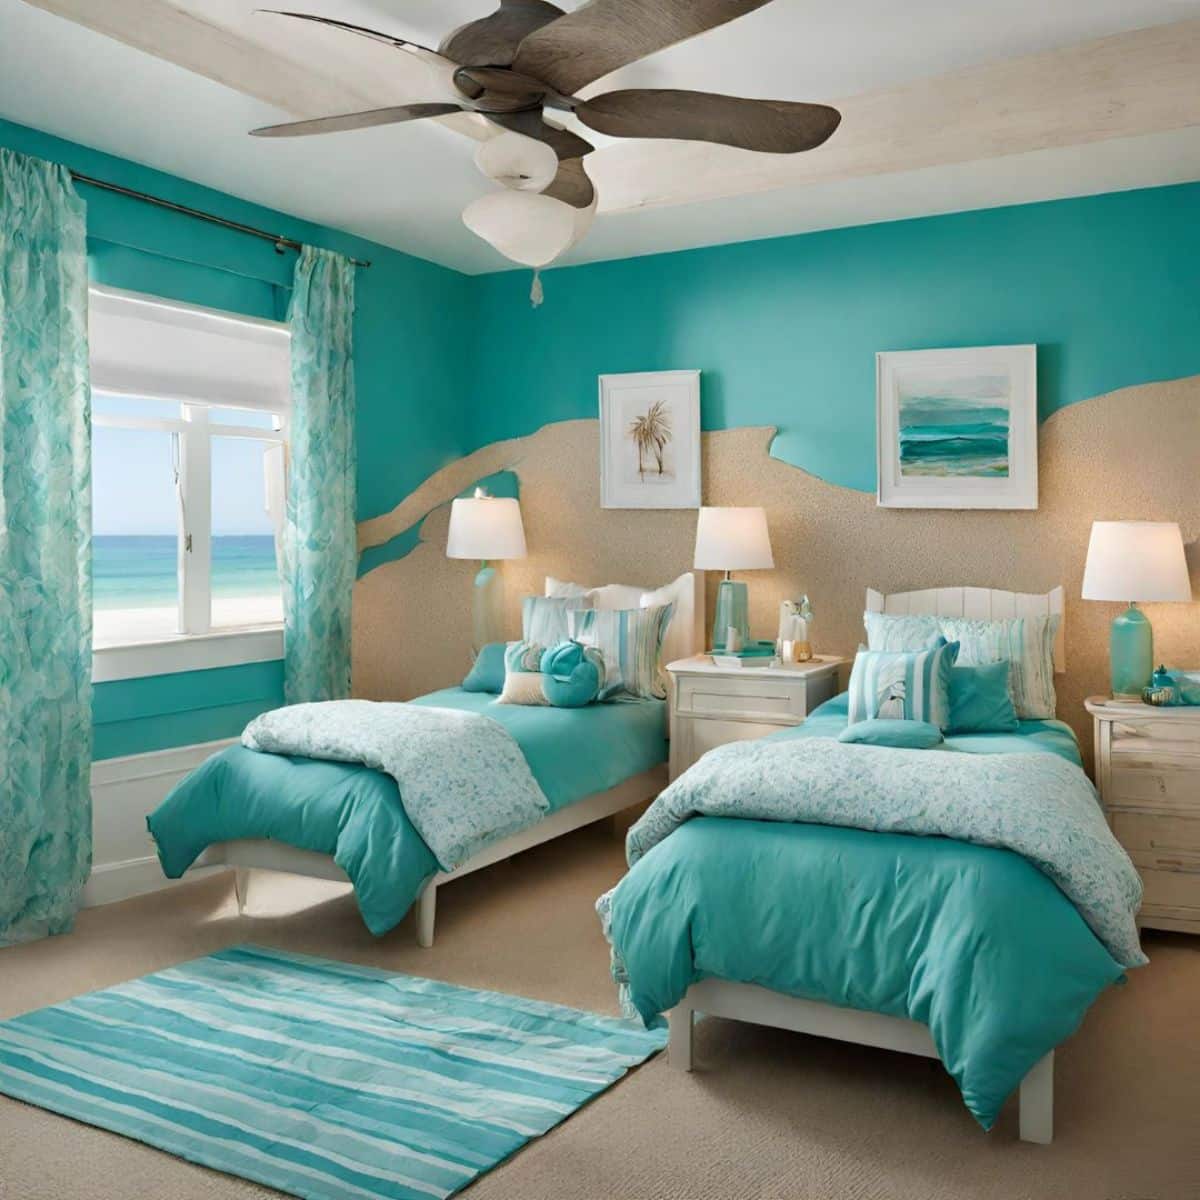 a teal bedroom for two kids, decorated with picture frames, lamps, and a ceiling fan